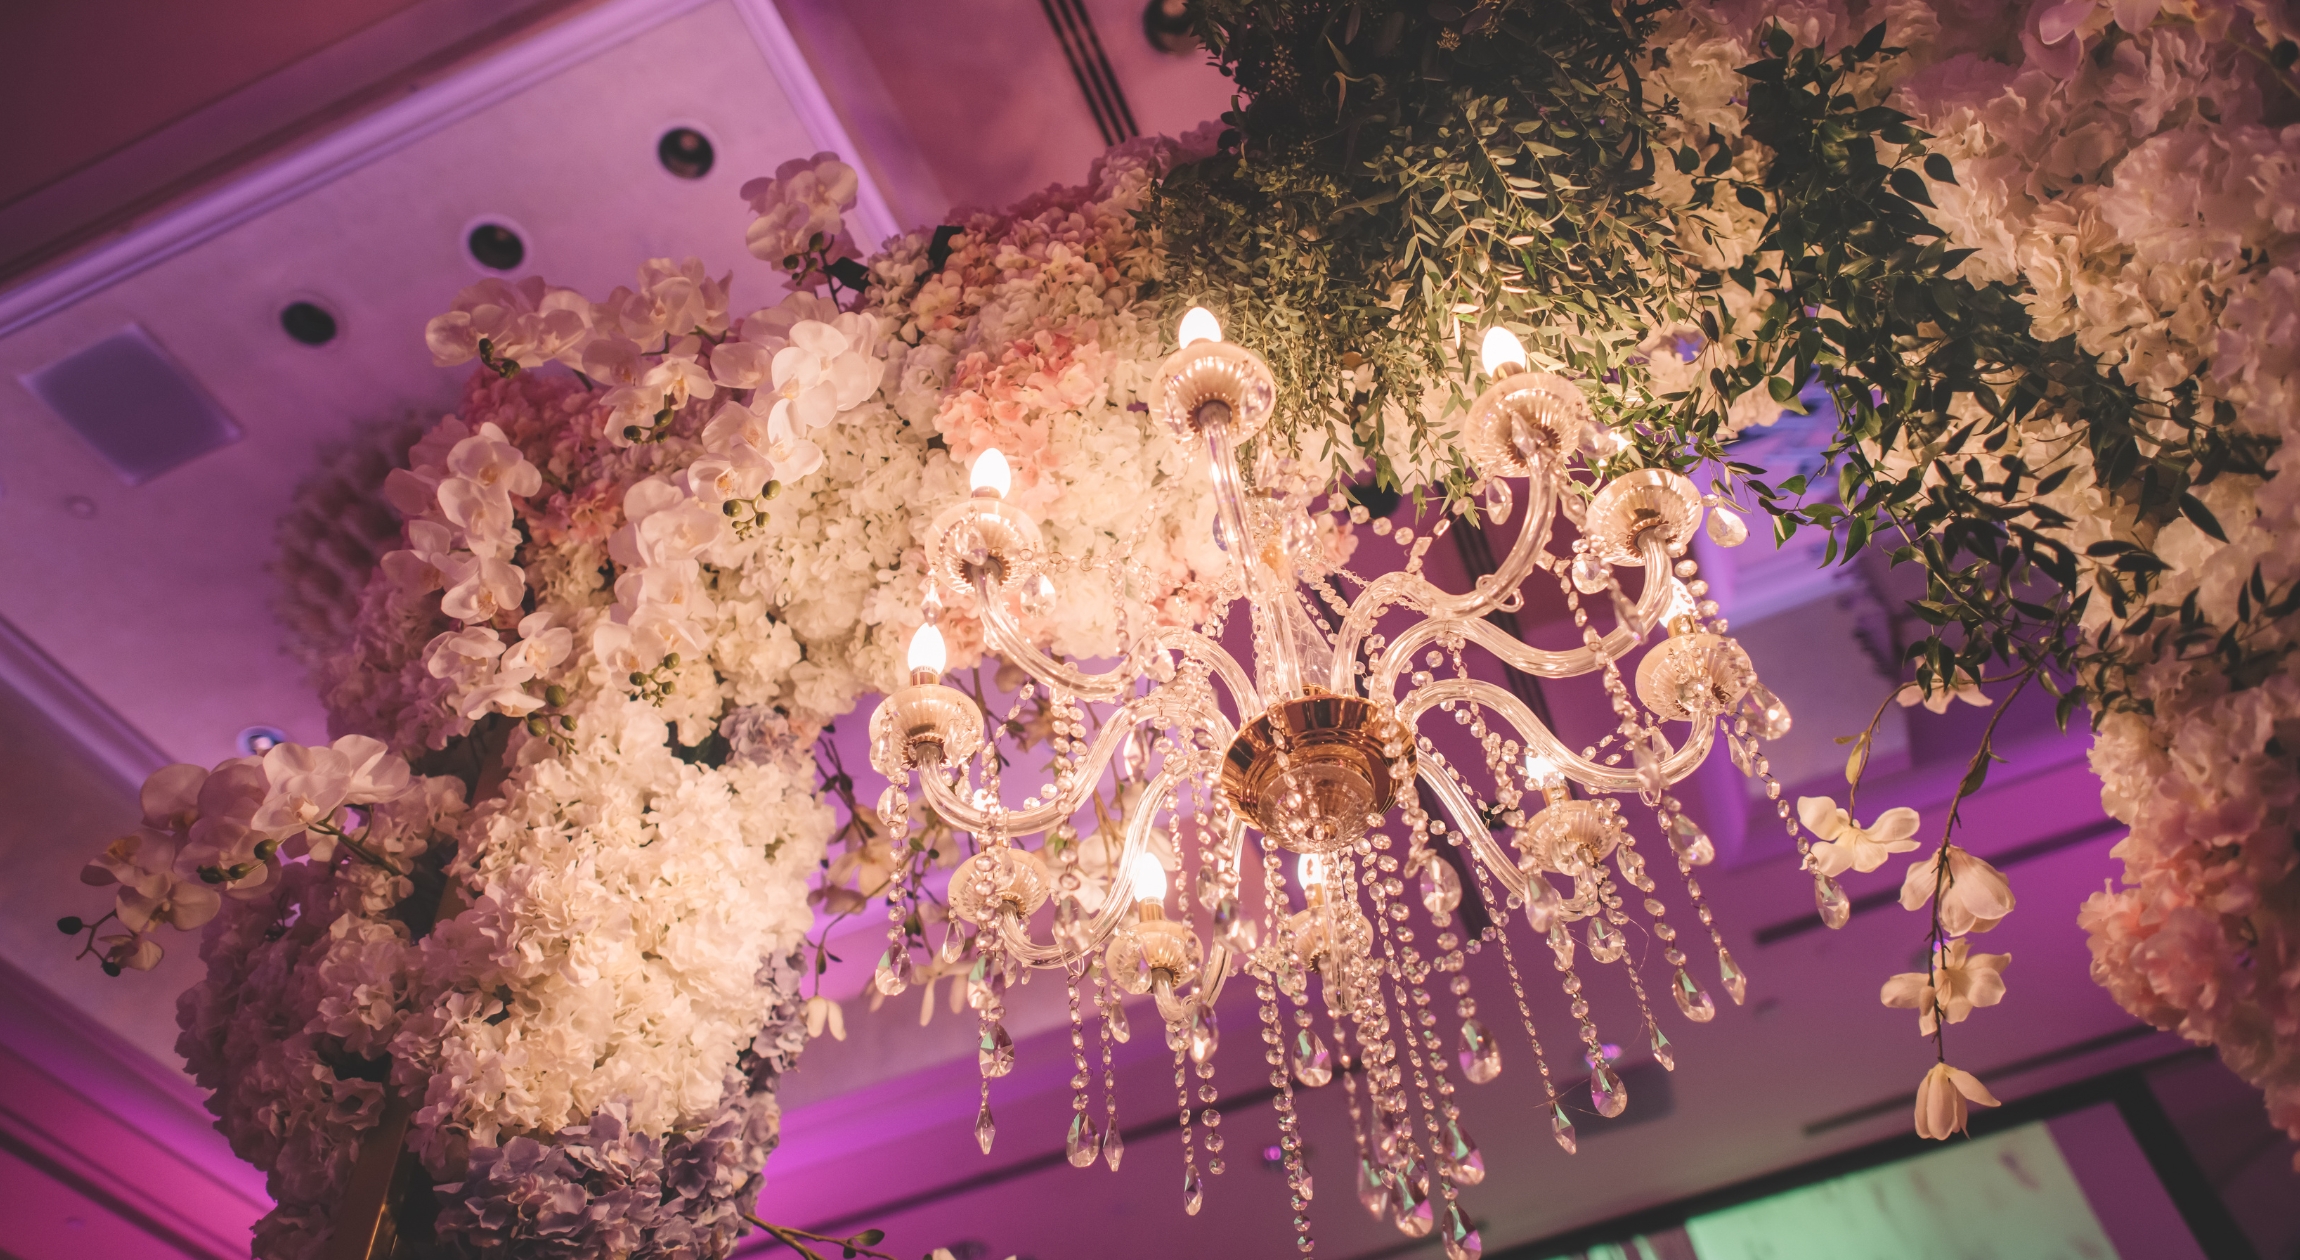 A chandelier handing on an installation with a lot of flowers